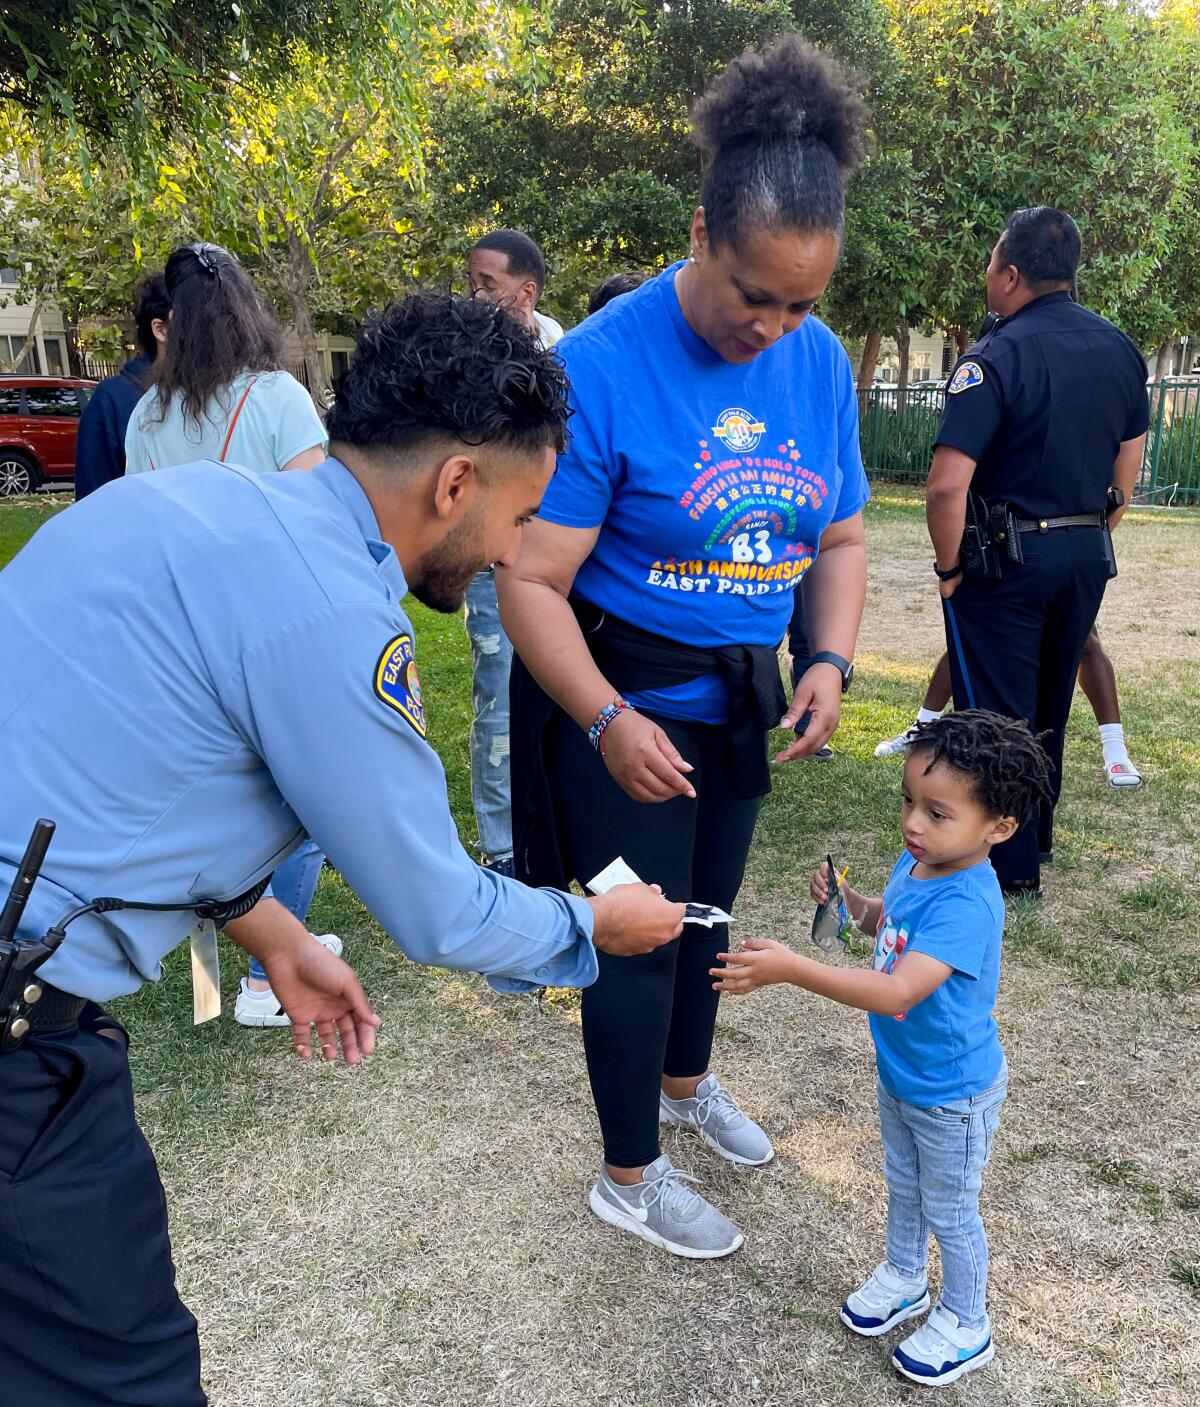 Community Service Officer Magd Algaheim giving a young community member a sticker during a National Night Out party